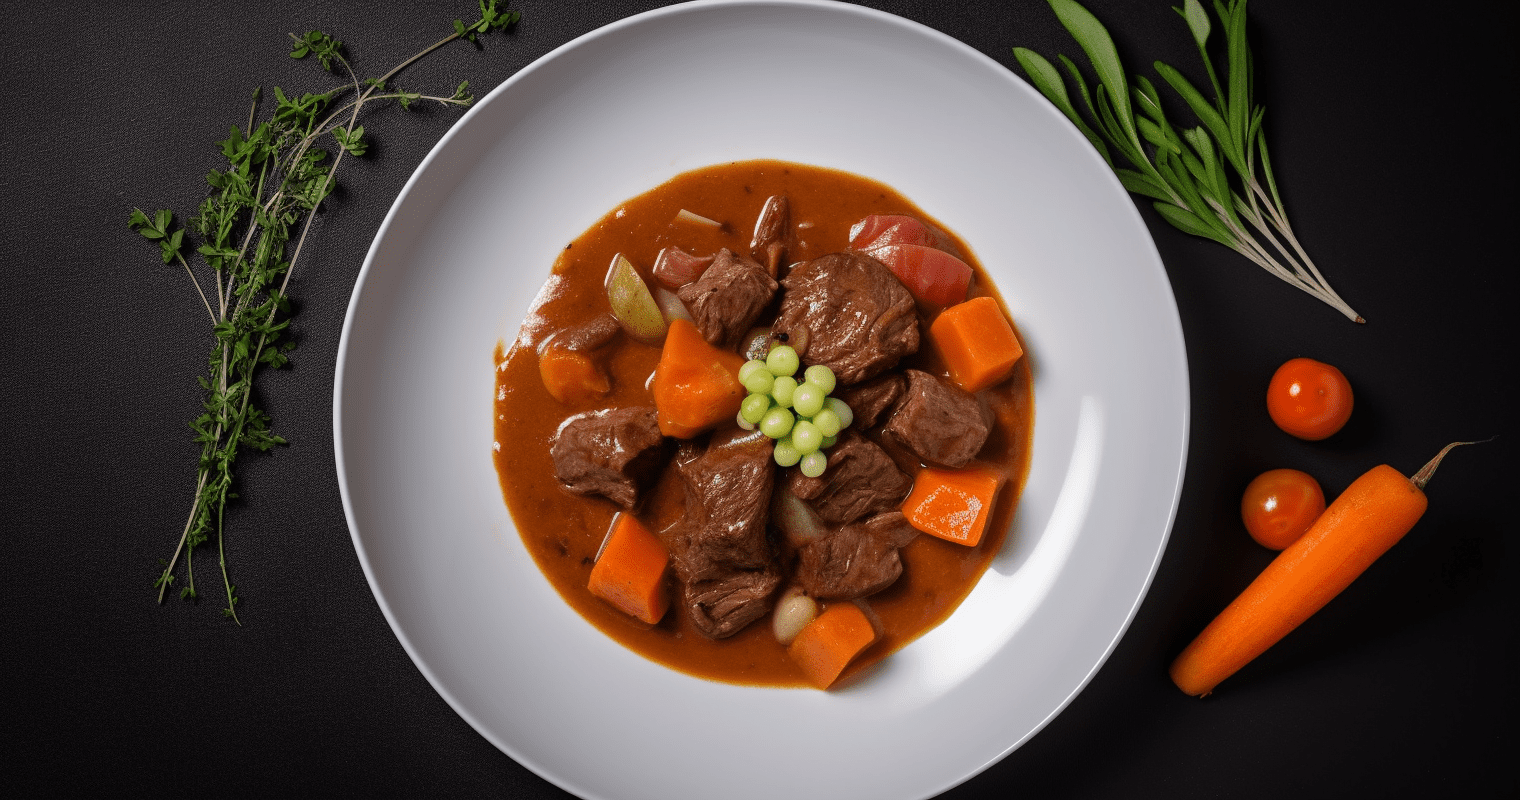 Warm and Flavorful Beef Stew Recipe for Fall